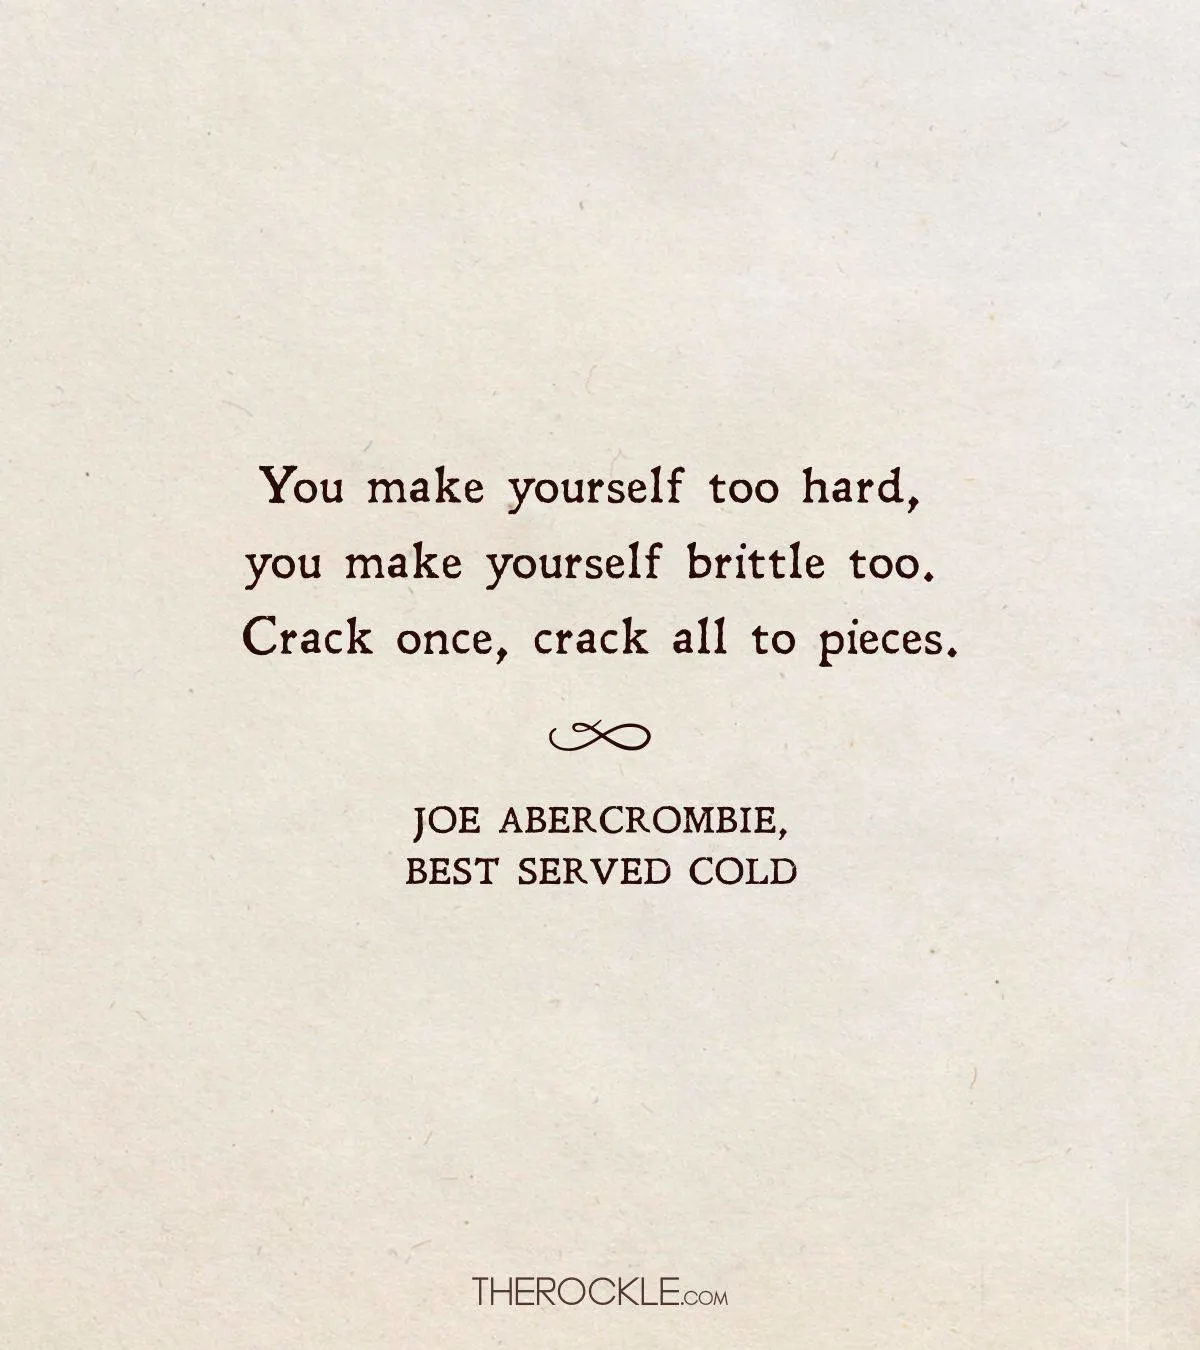 Abercrombie's quote on self-preservation